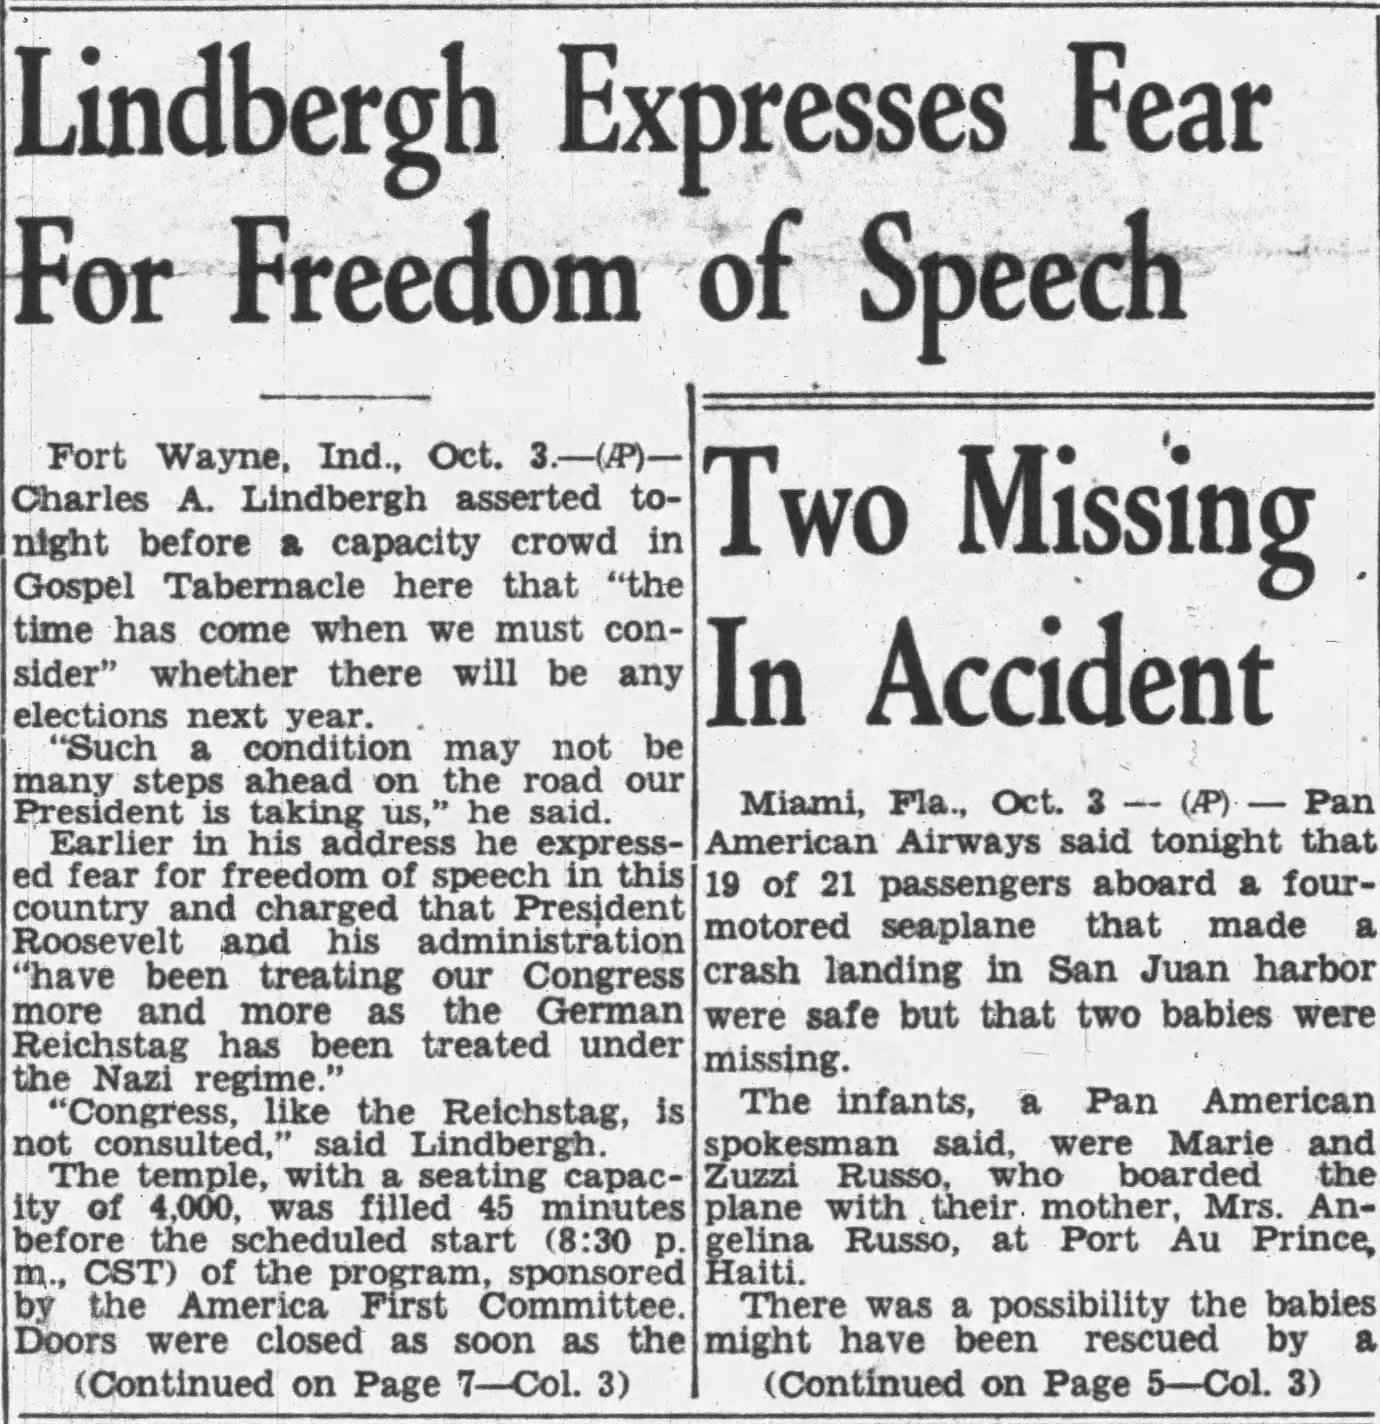 Lindbergh Expresses Fear For Freedom of Speech